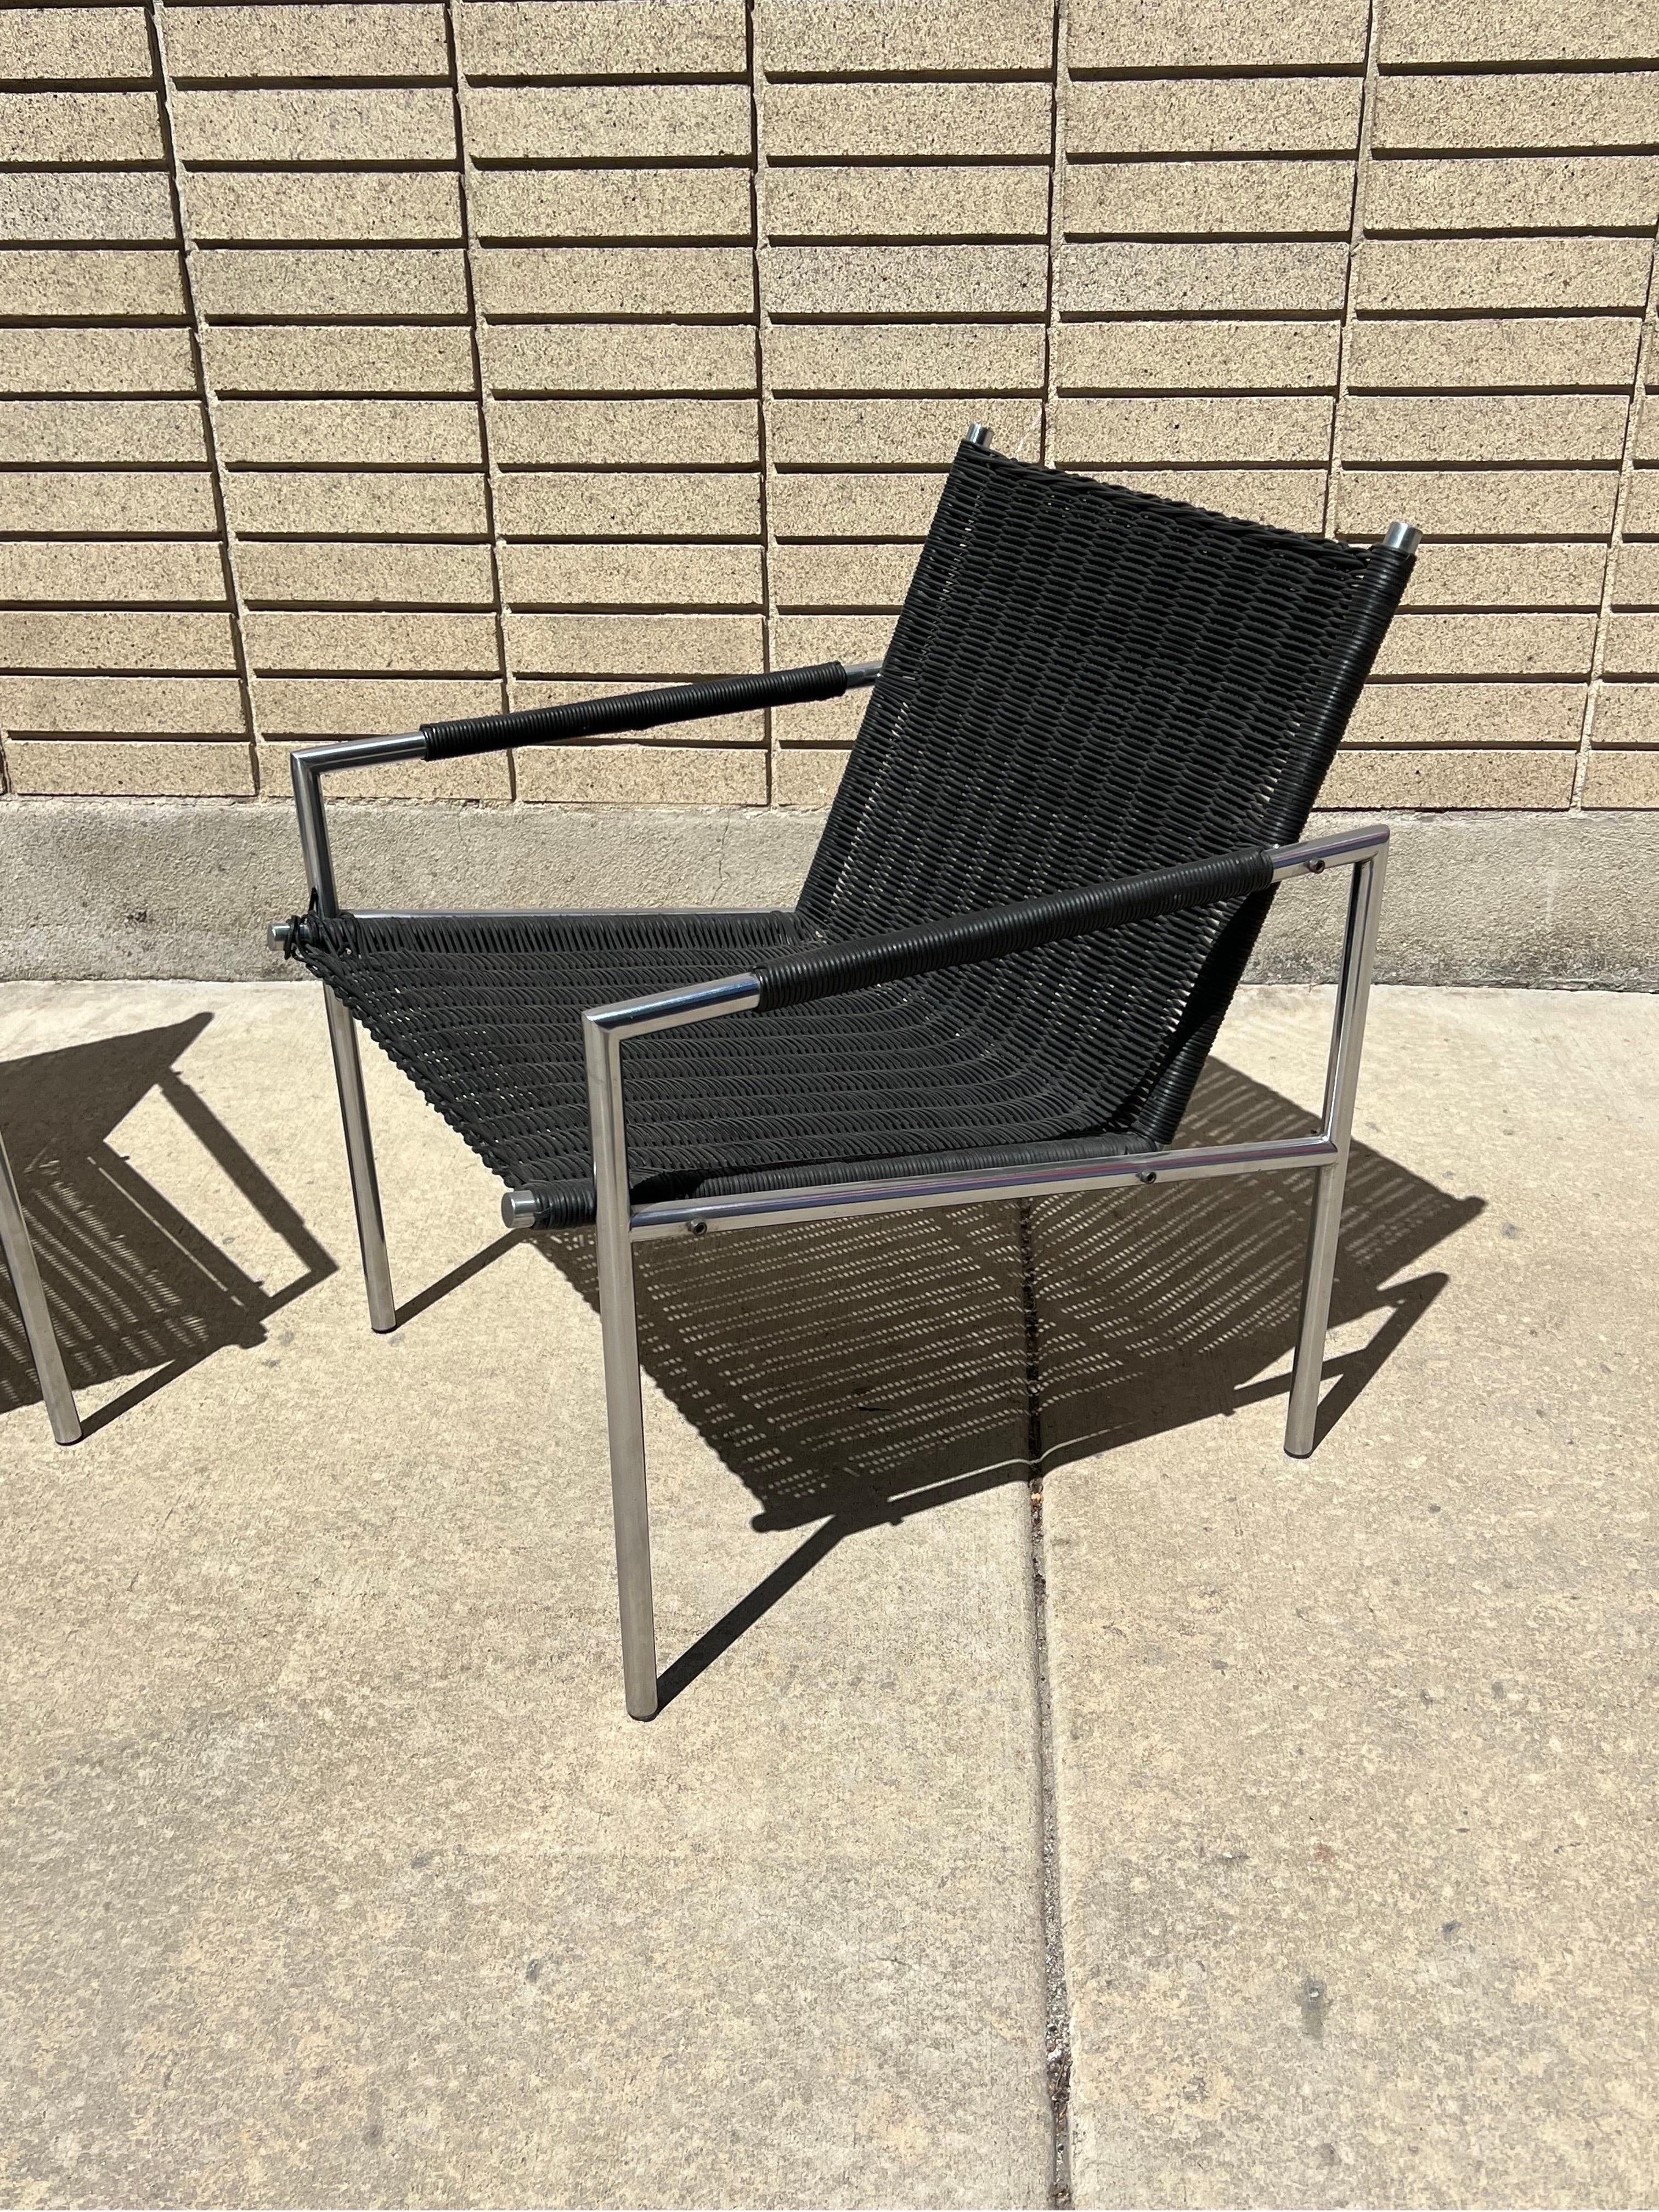 Pair of Martin Visser Danish SZ01 Lounge Chairs Cane and Steel Mid Century In Good Condition For Sale In Boise, ID